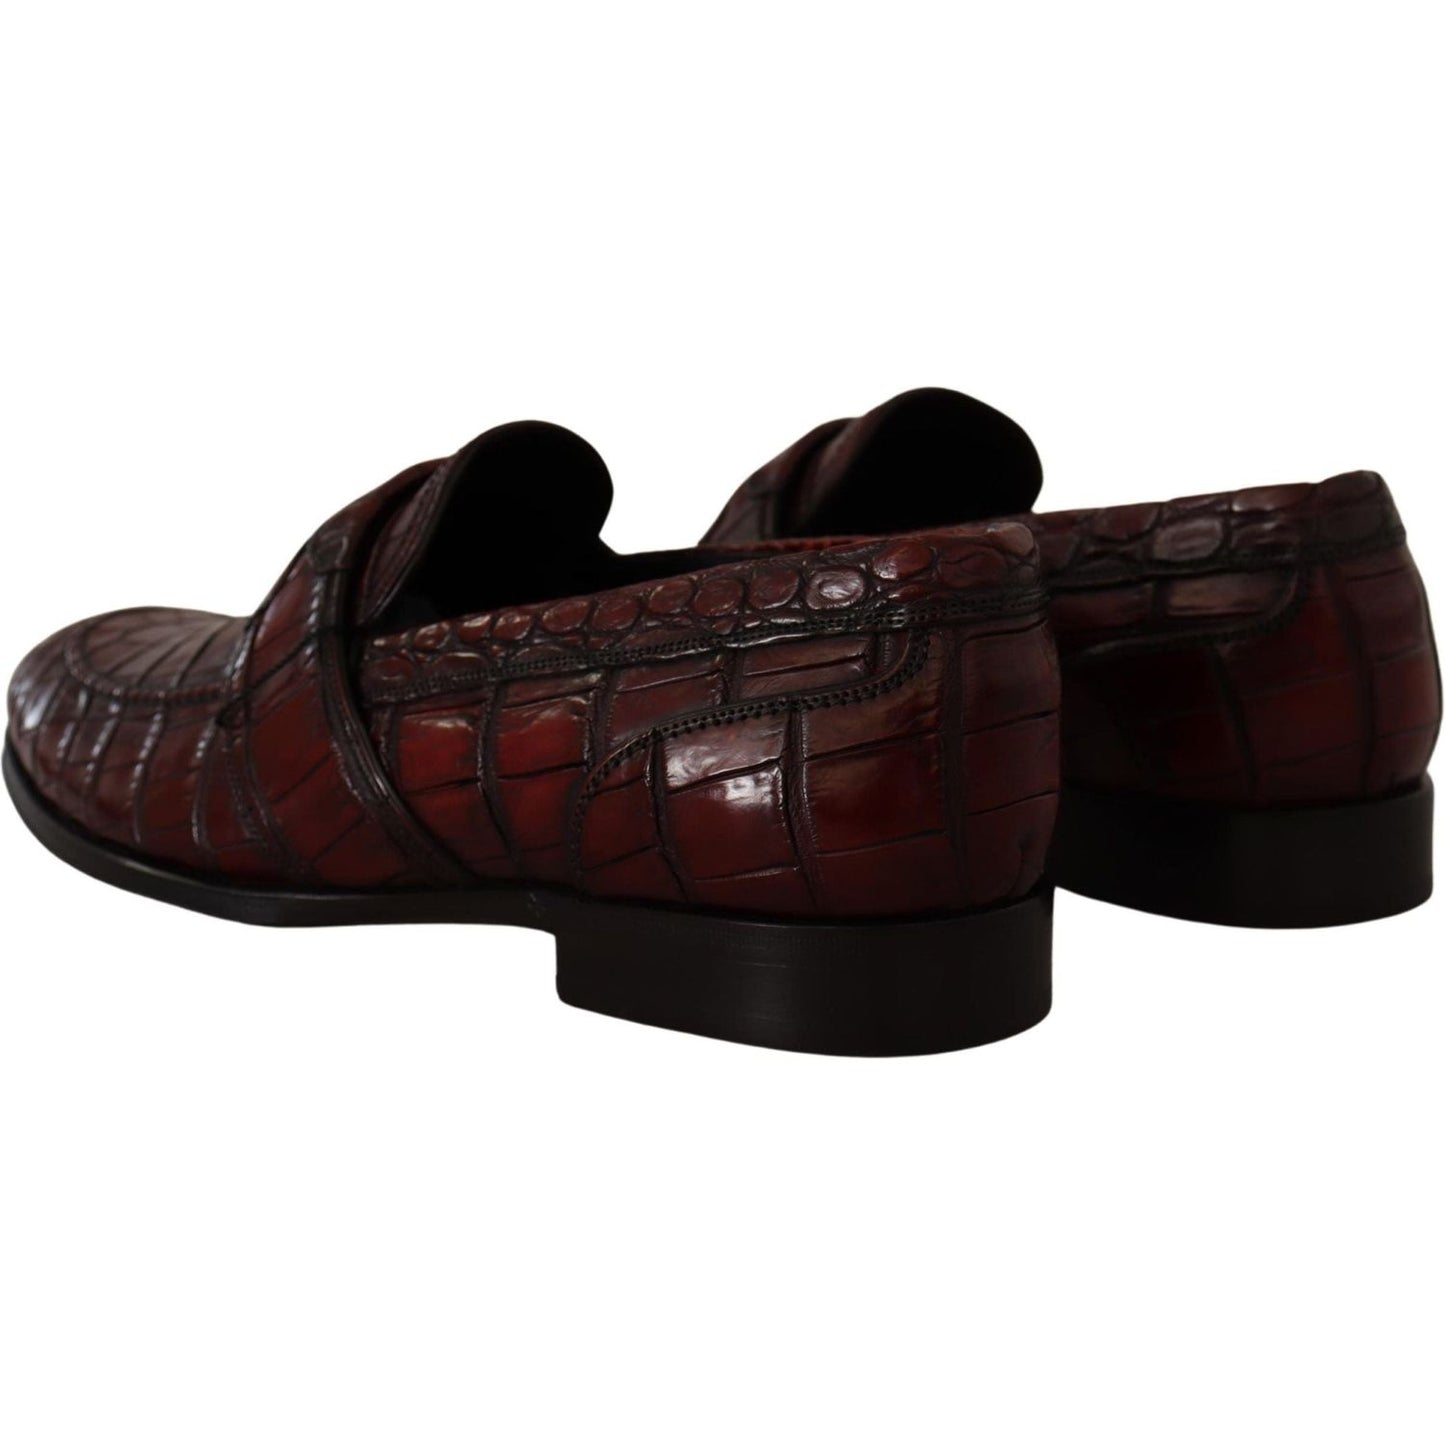 Dolce & Gabbana Exotic Croc Leather Bordeaux Loafers bordeaux-exotic-leather-dress-derby-shoes IMG_2083-scaled-3be2384a-793.jpg